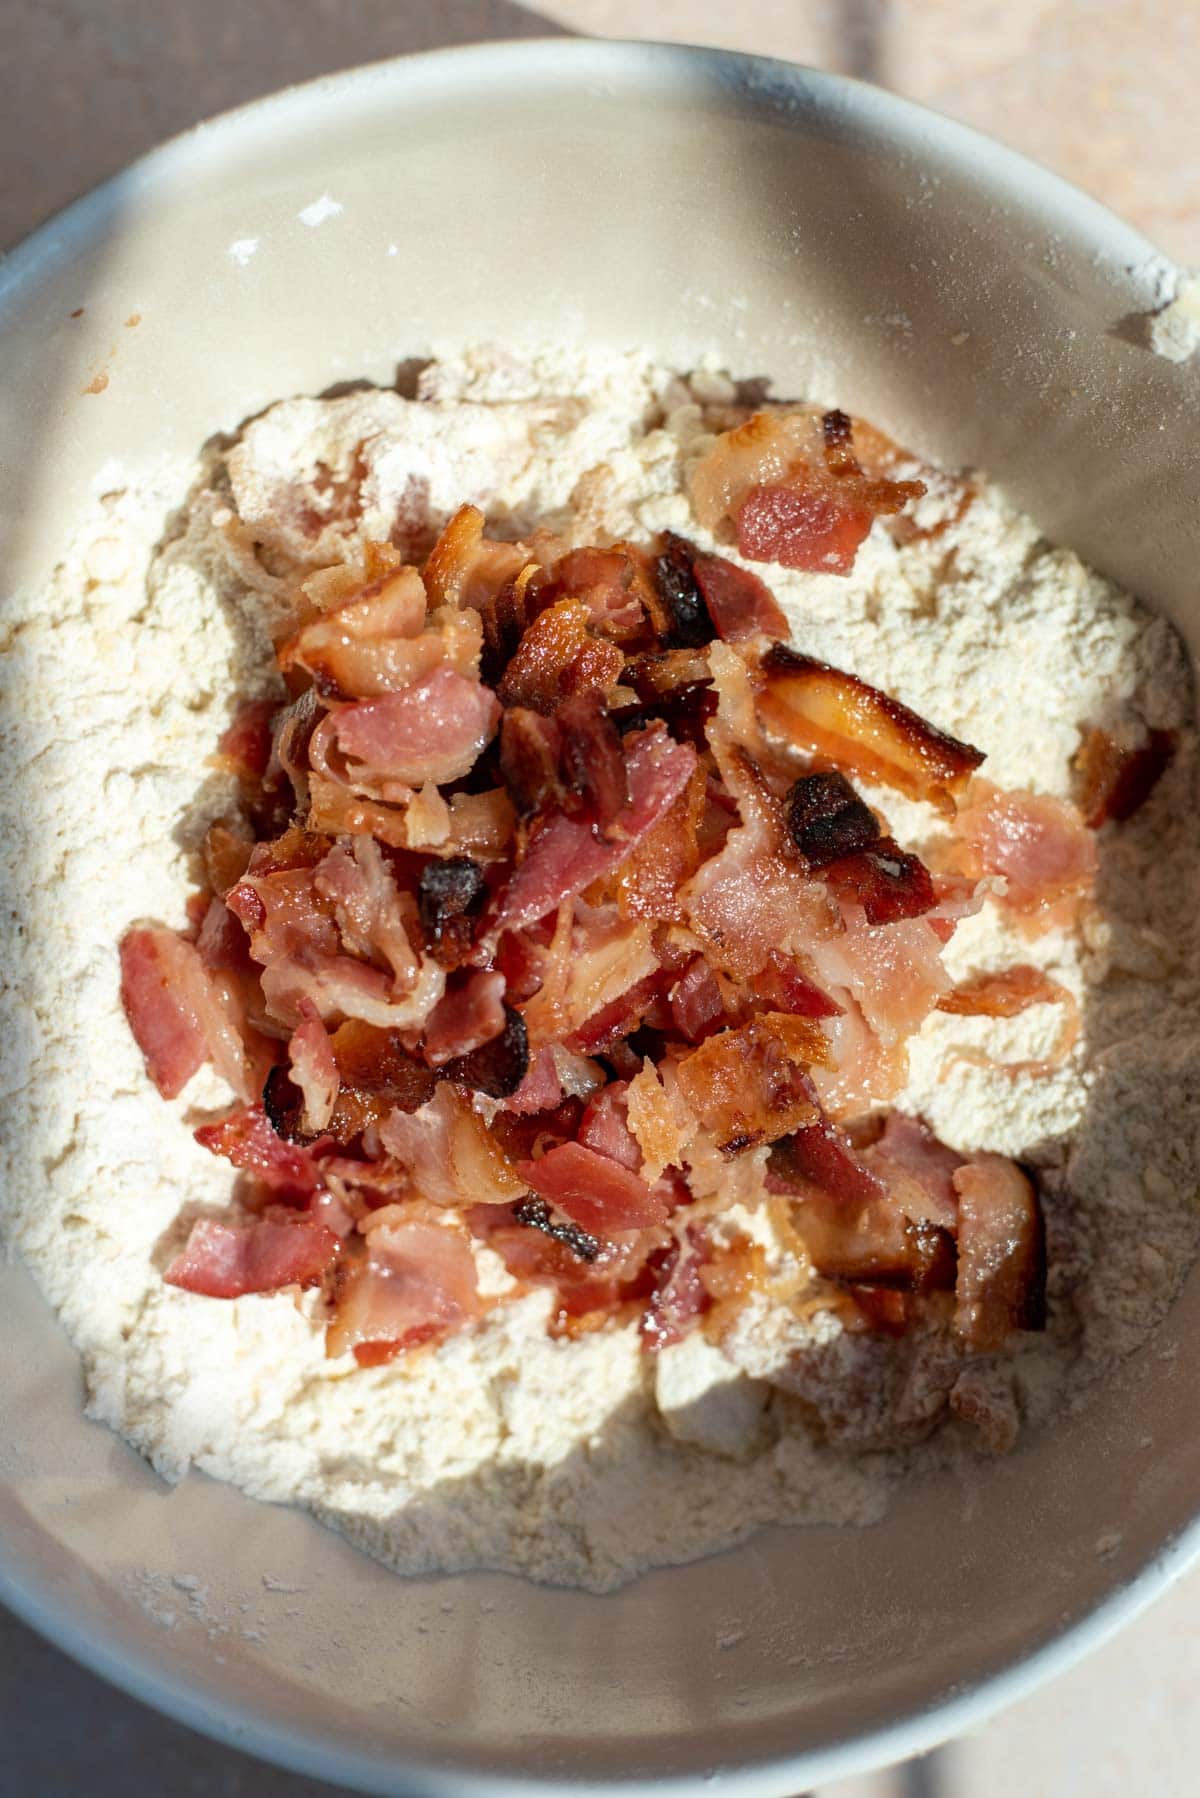 A large mixing bowl full of the flour and topped off with the glazed bacon.